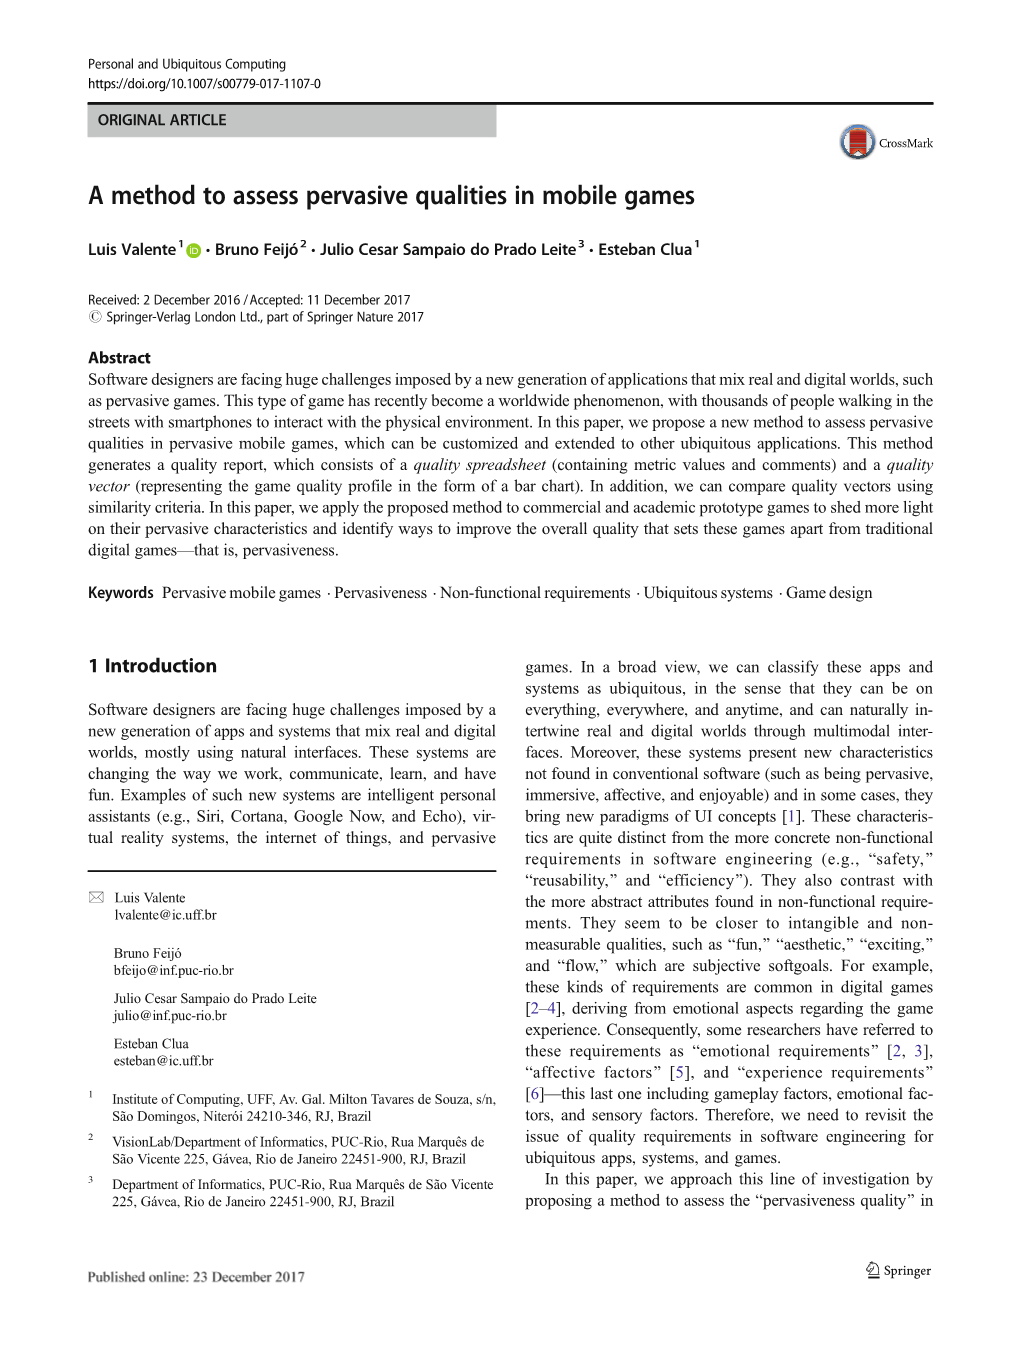 A Method to Assess Pervasive Qualities in Mobile Games